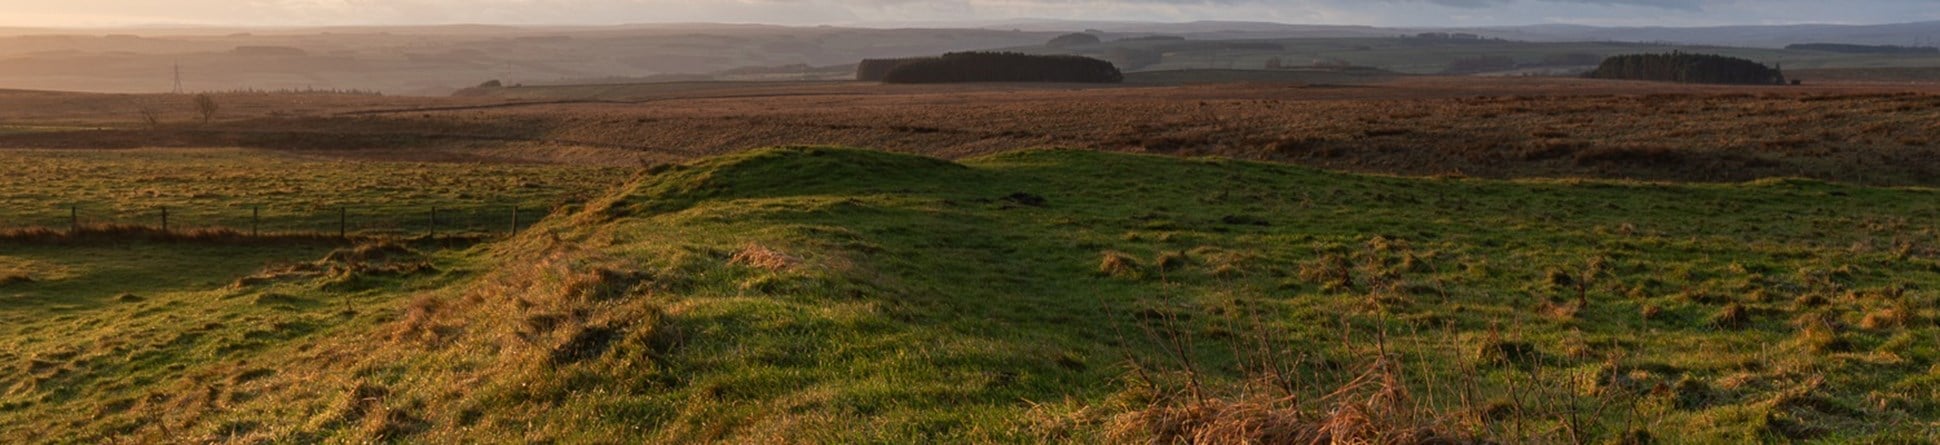 Site of Carrawburgh Roman Fort on Hadrian's Wall, Northumberland